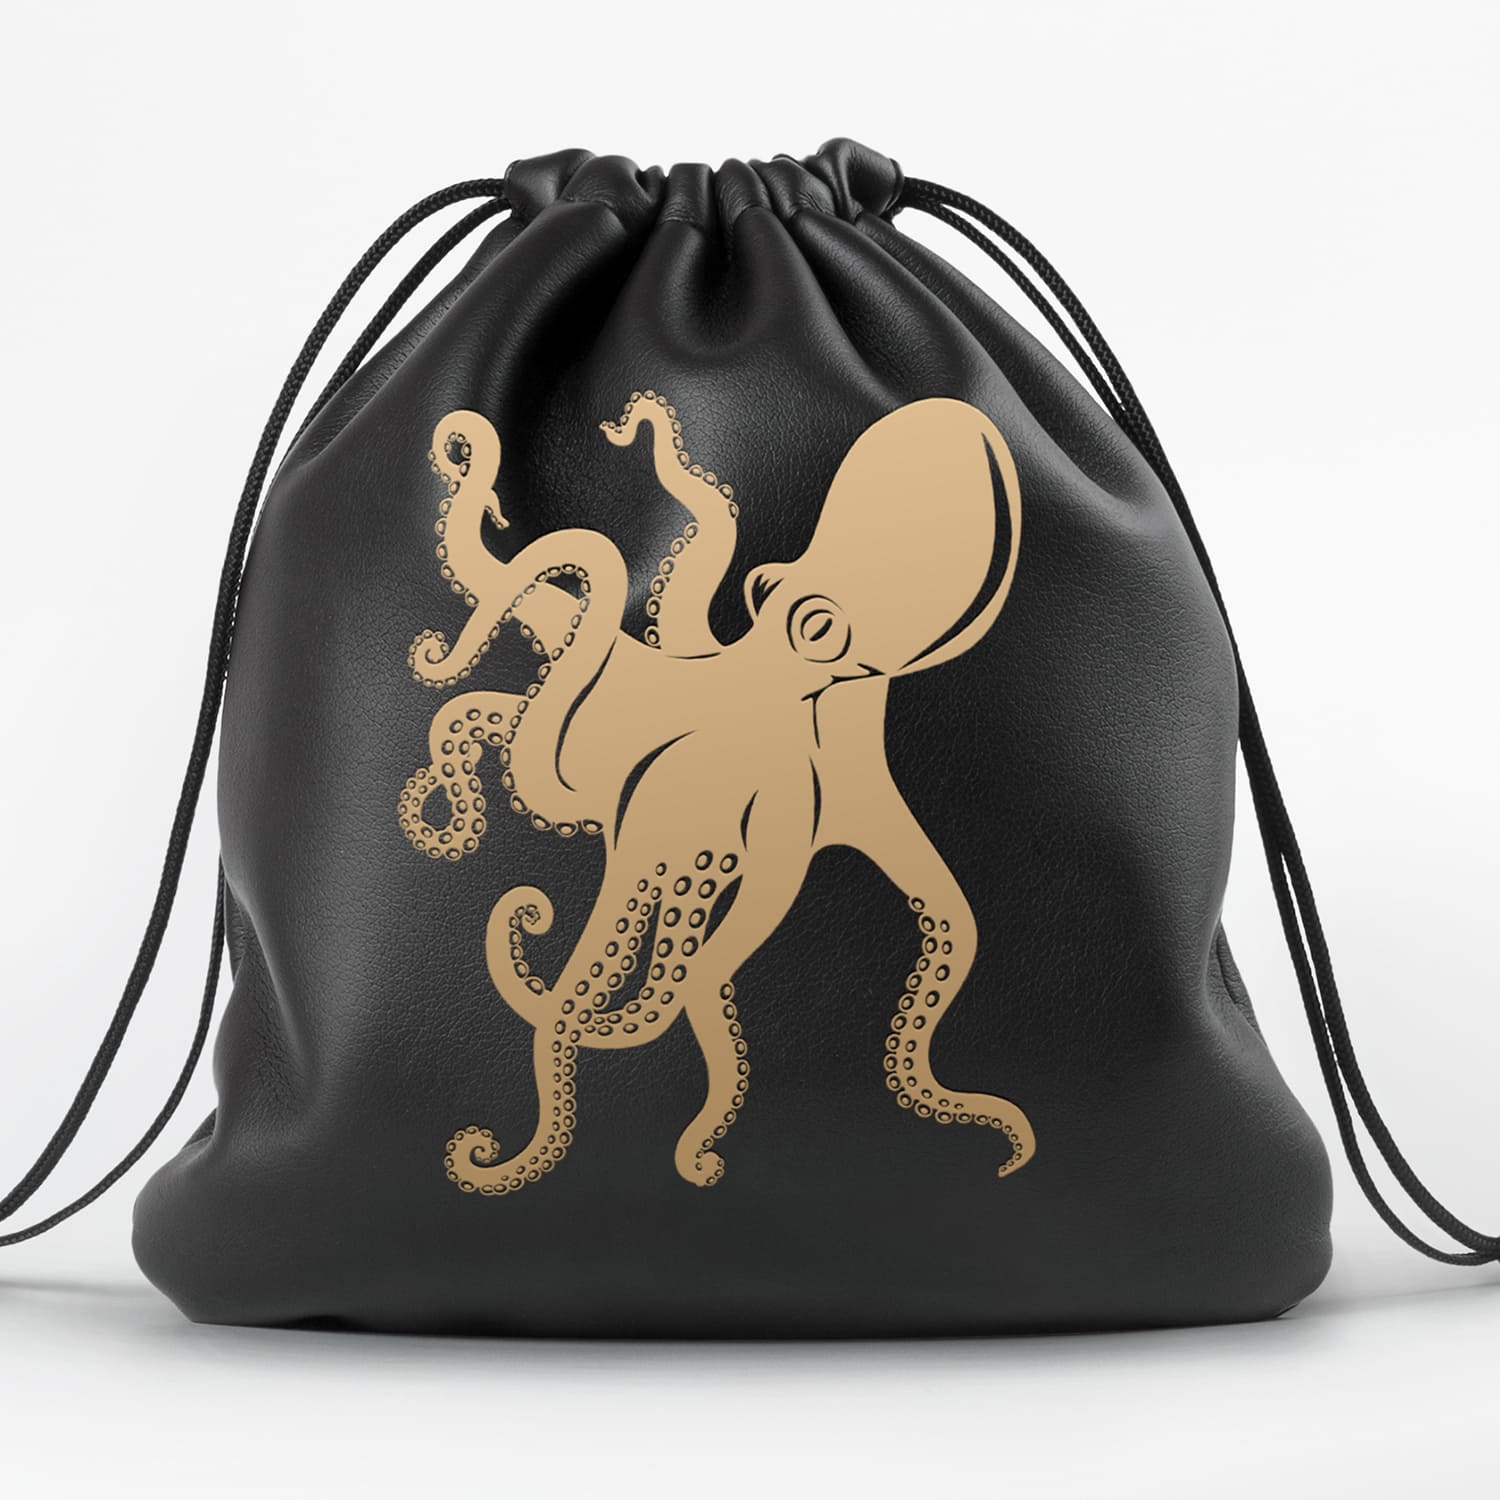 Black bag with a gold octopus on it.